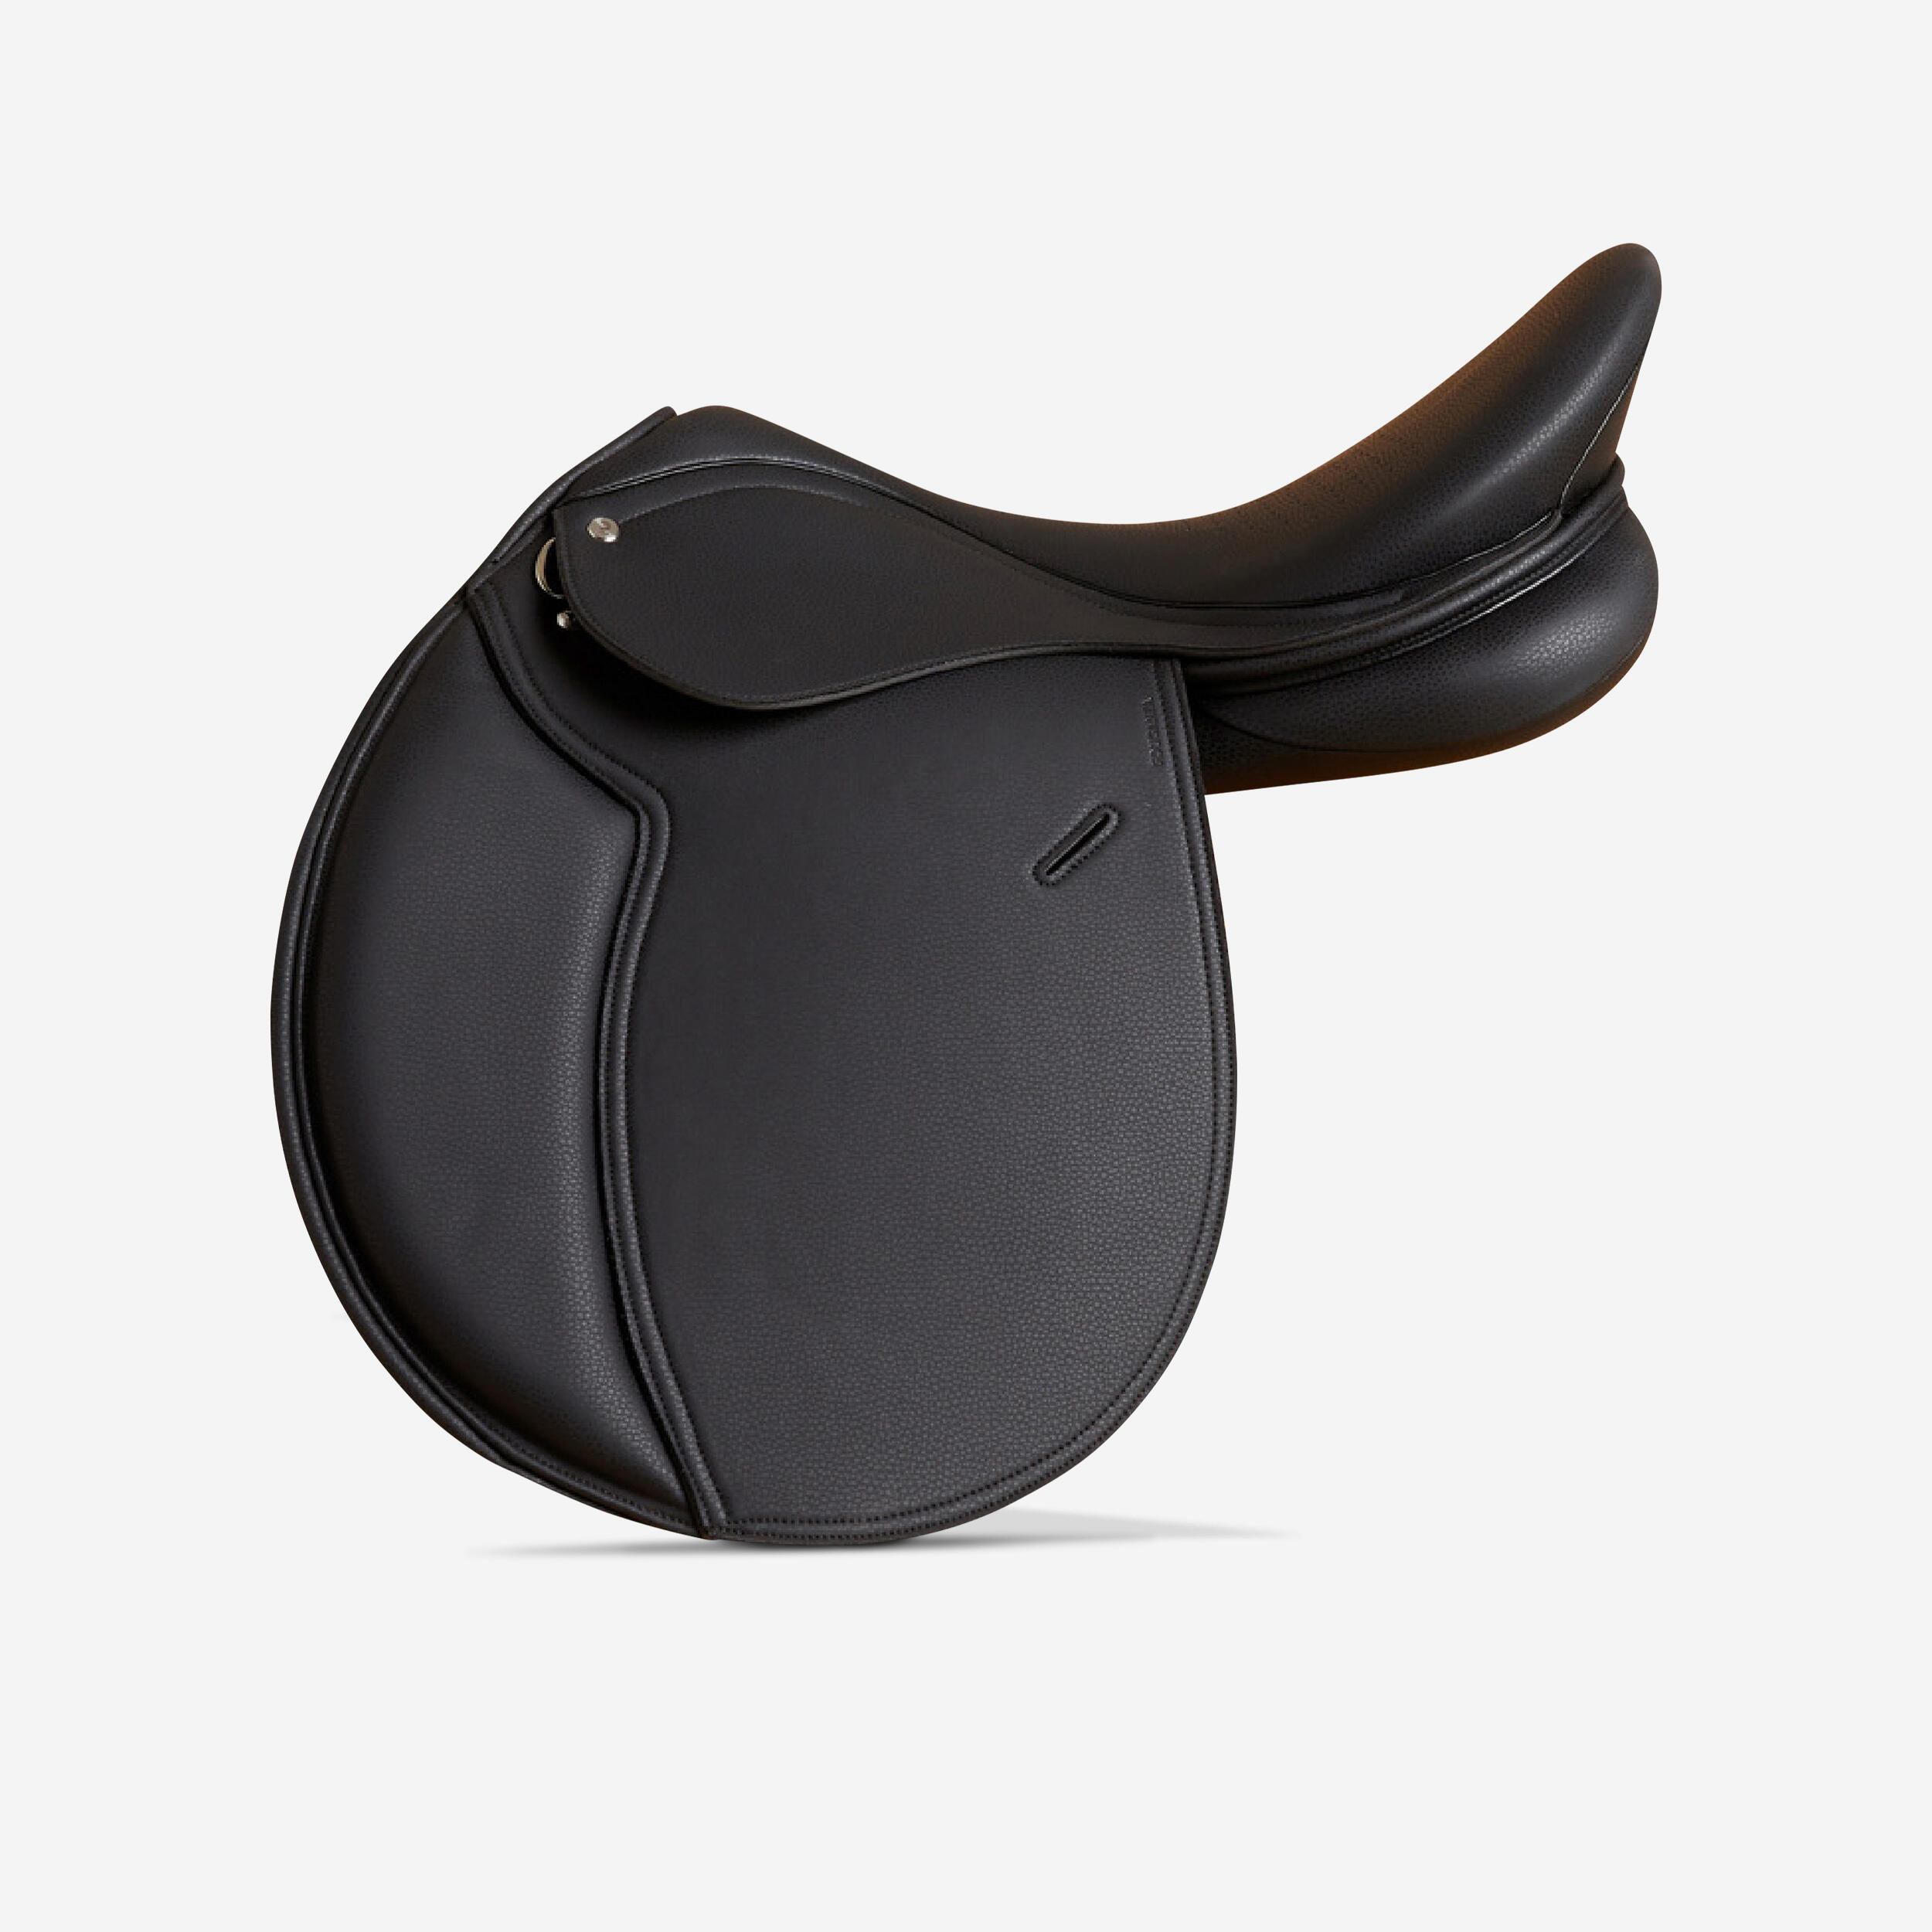 Image of "Horse Riding Synthetic Saddle for Horse and Pony 17.5"" - 100 Black"